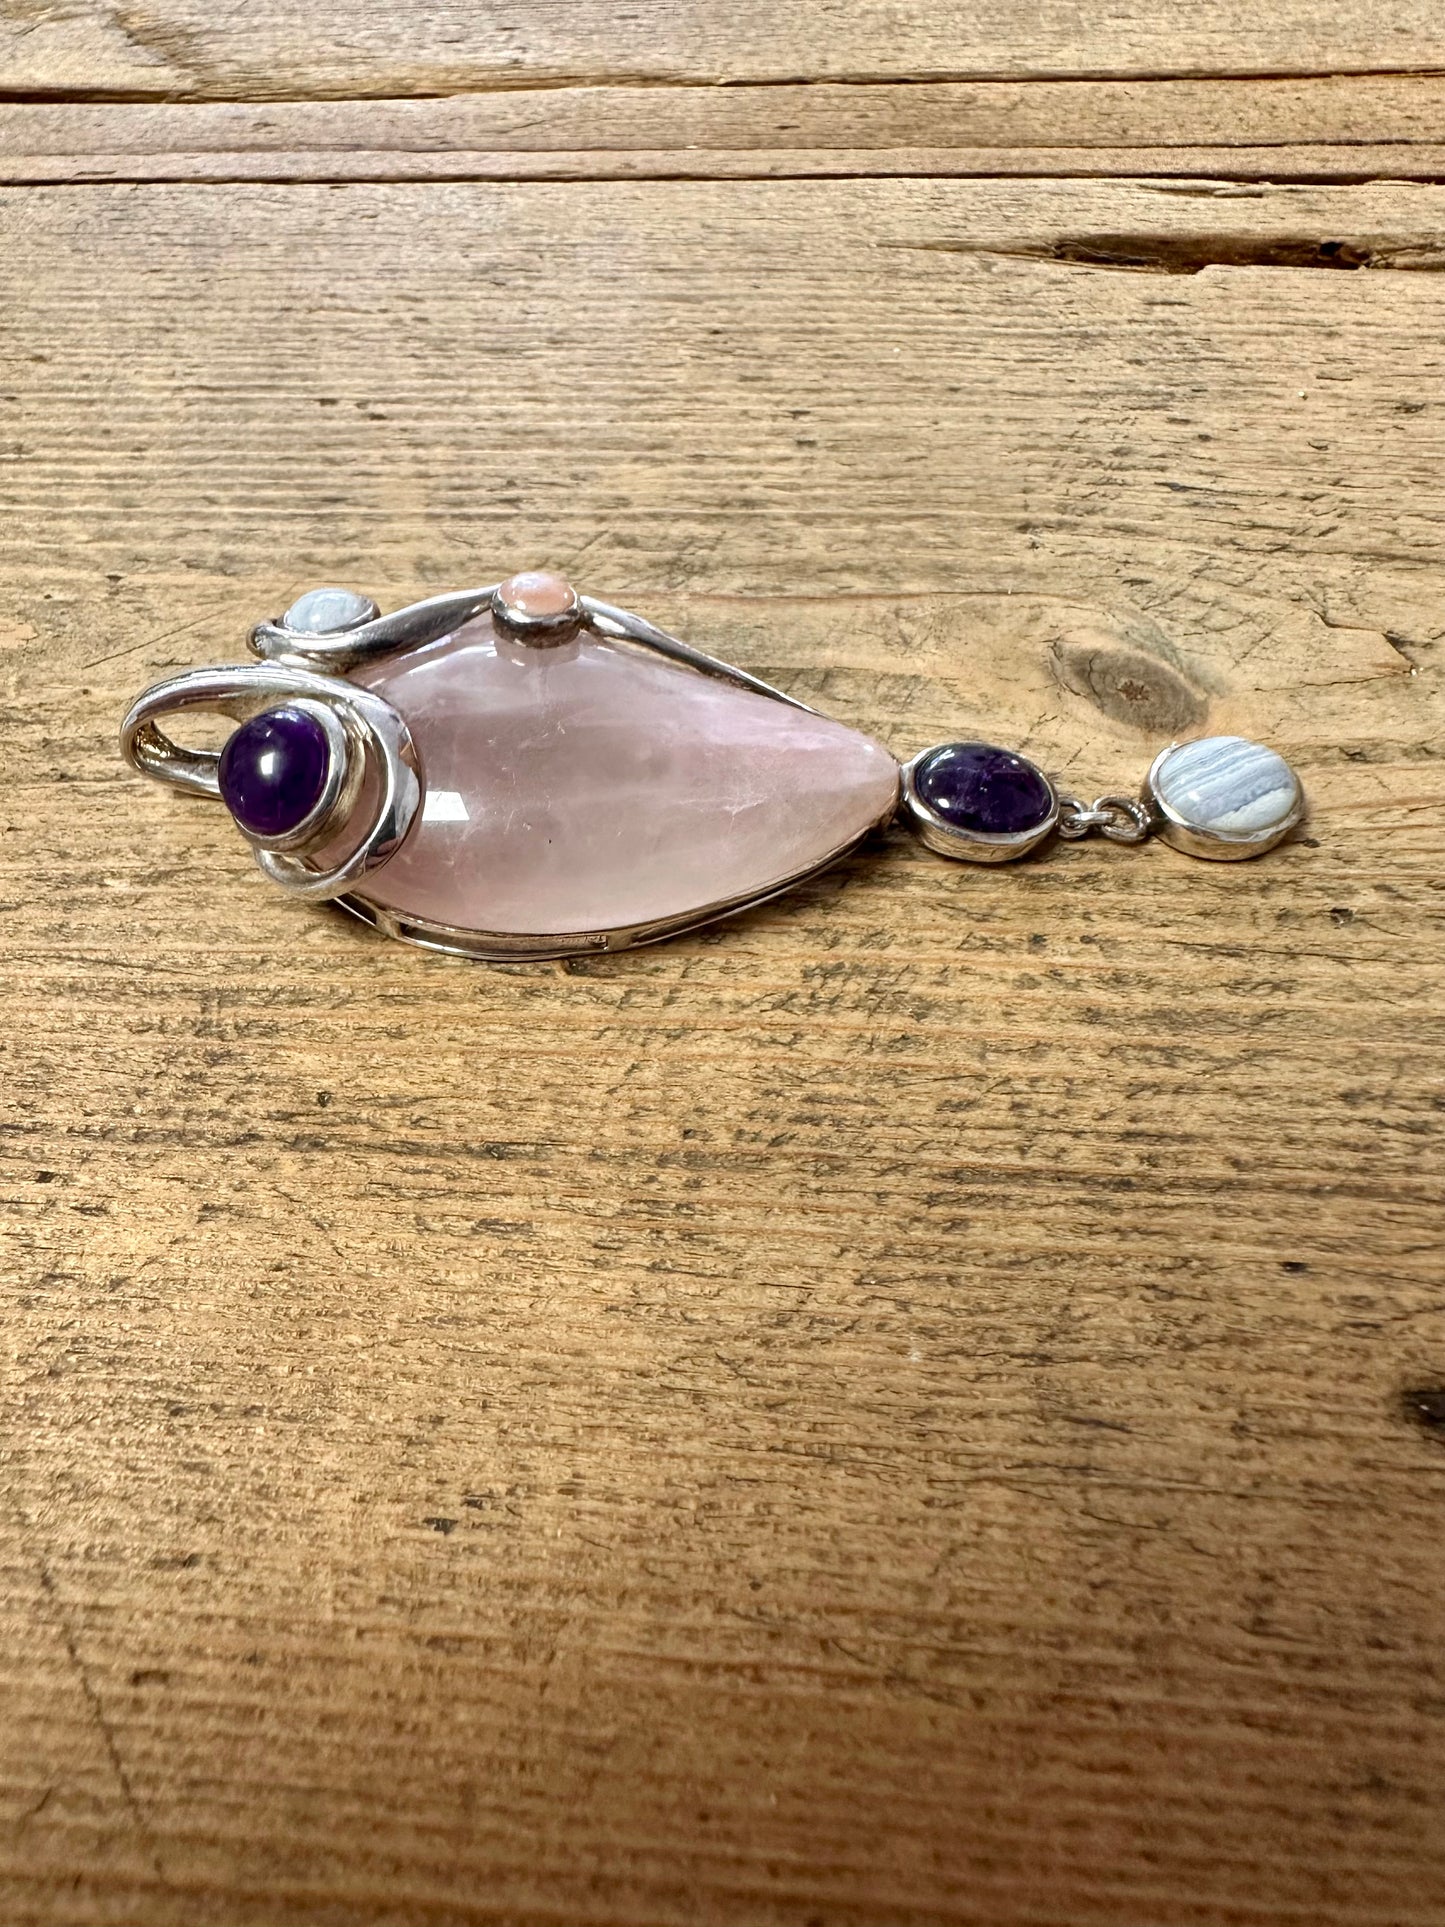 Abstract Rose Quarts Amethyst and Agate 925 Silver Pendant